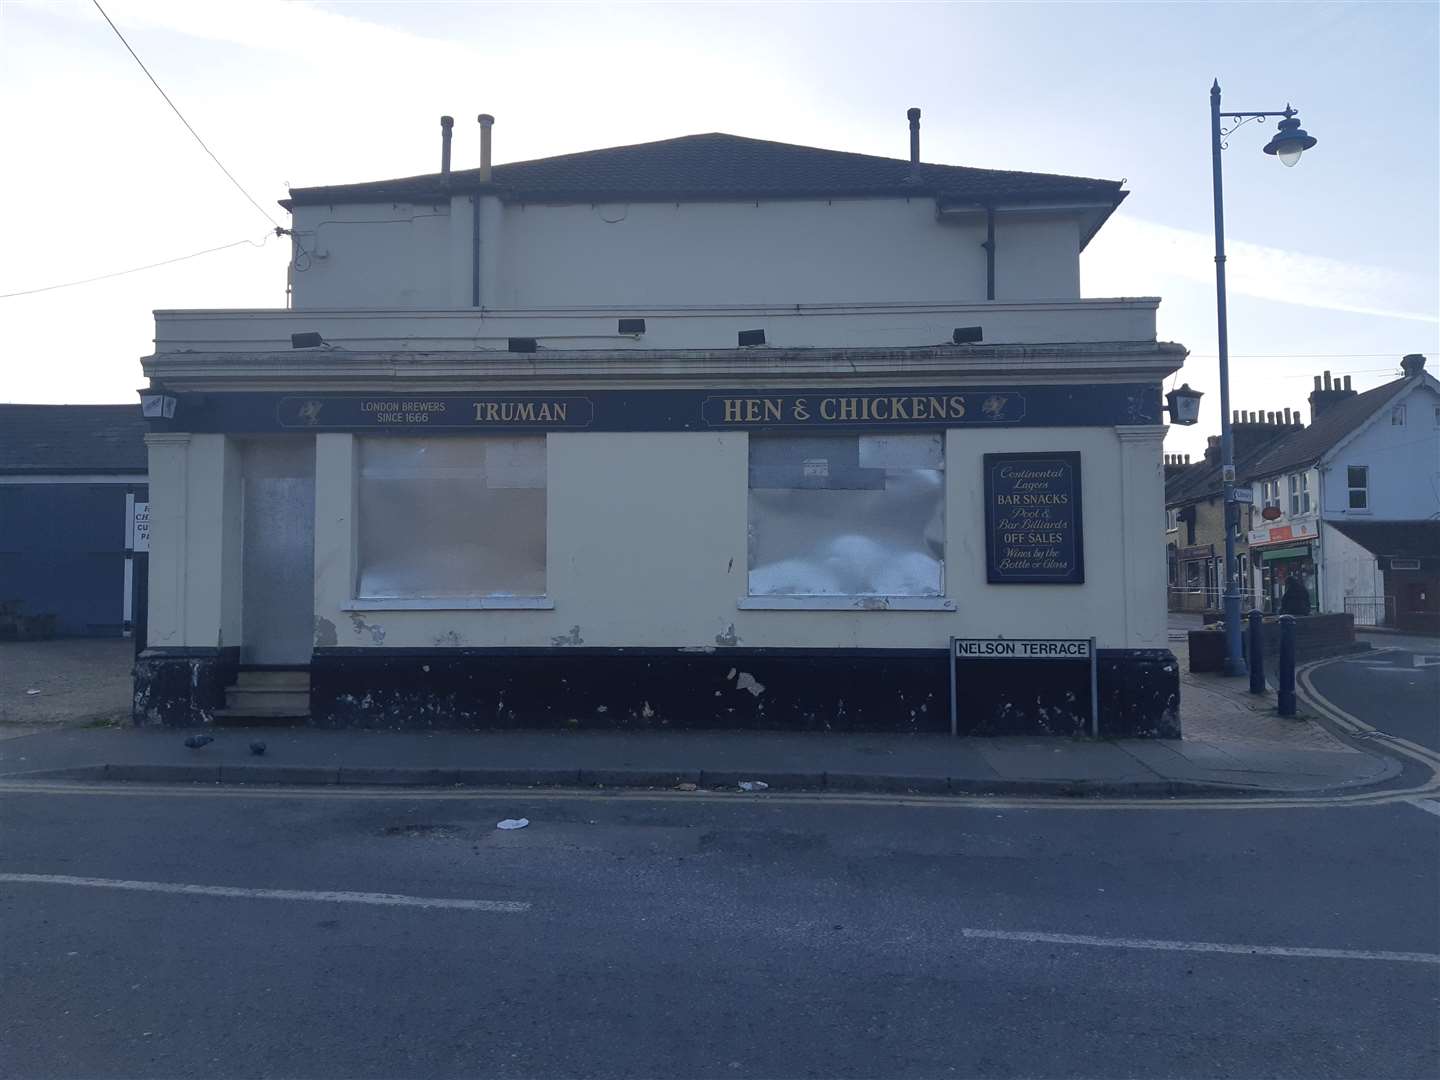 The boarded-up pub